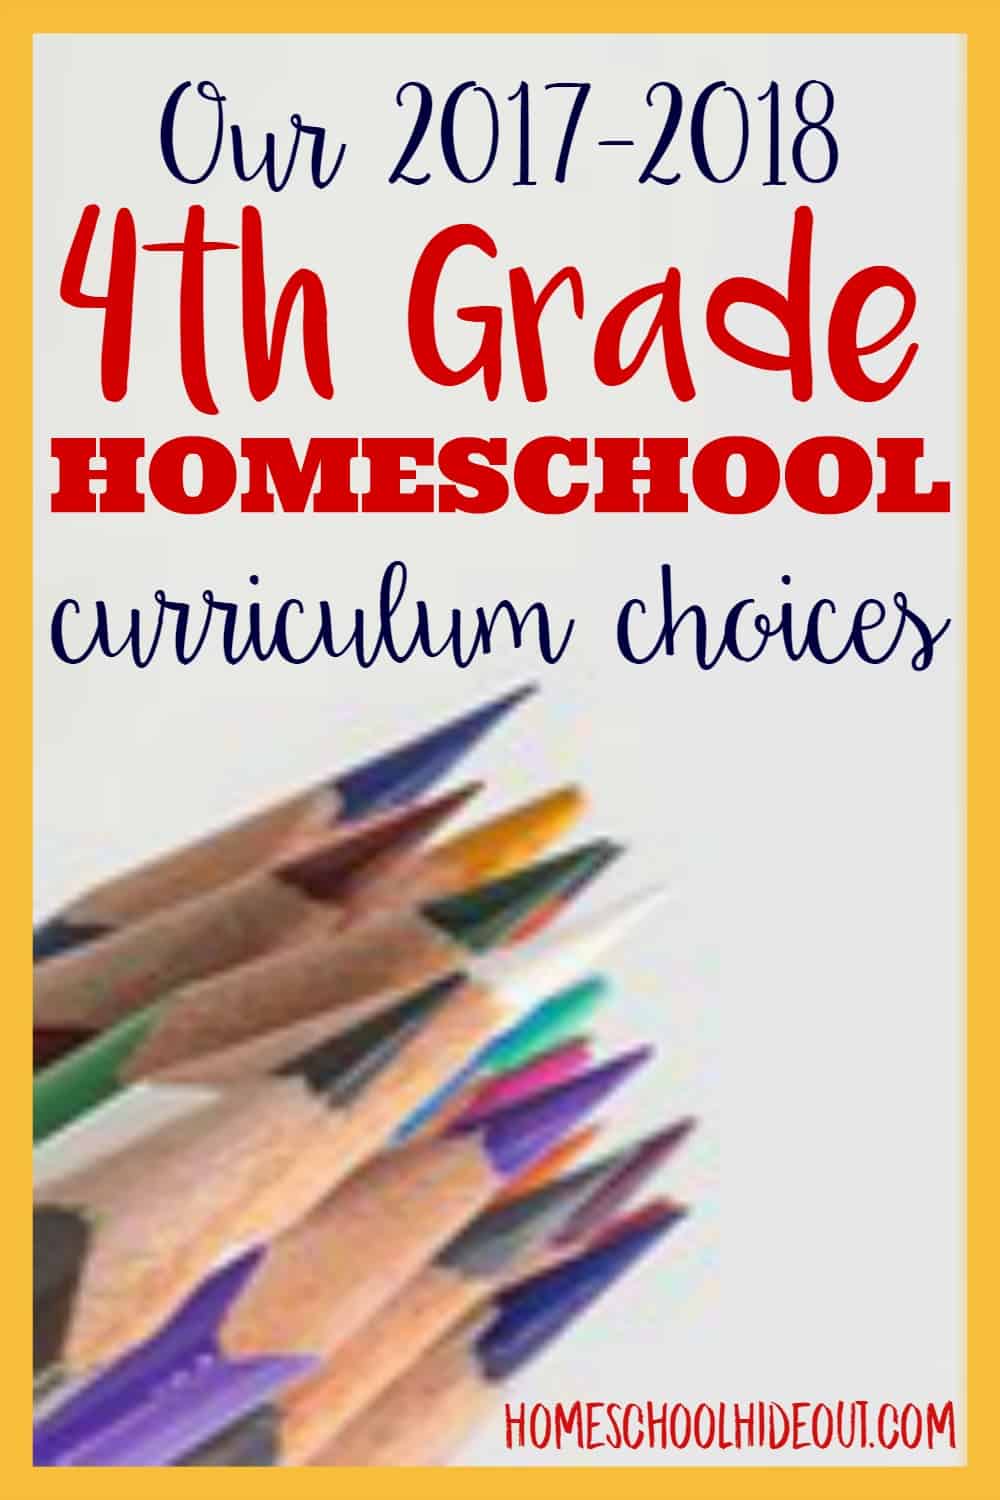 Looking for the perfect 4th grade homeschool curriculum? Check out how we're incorporating more hands-on learning this year.